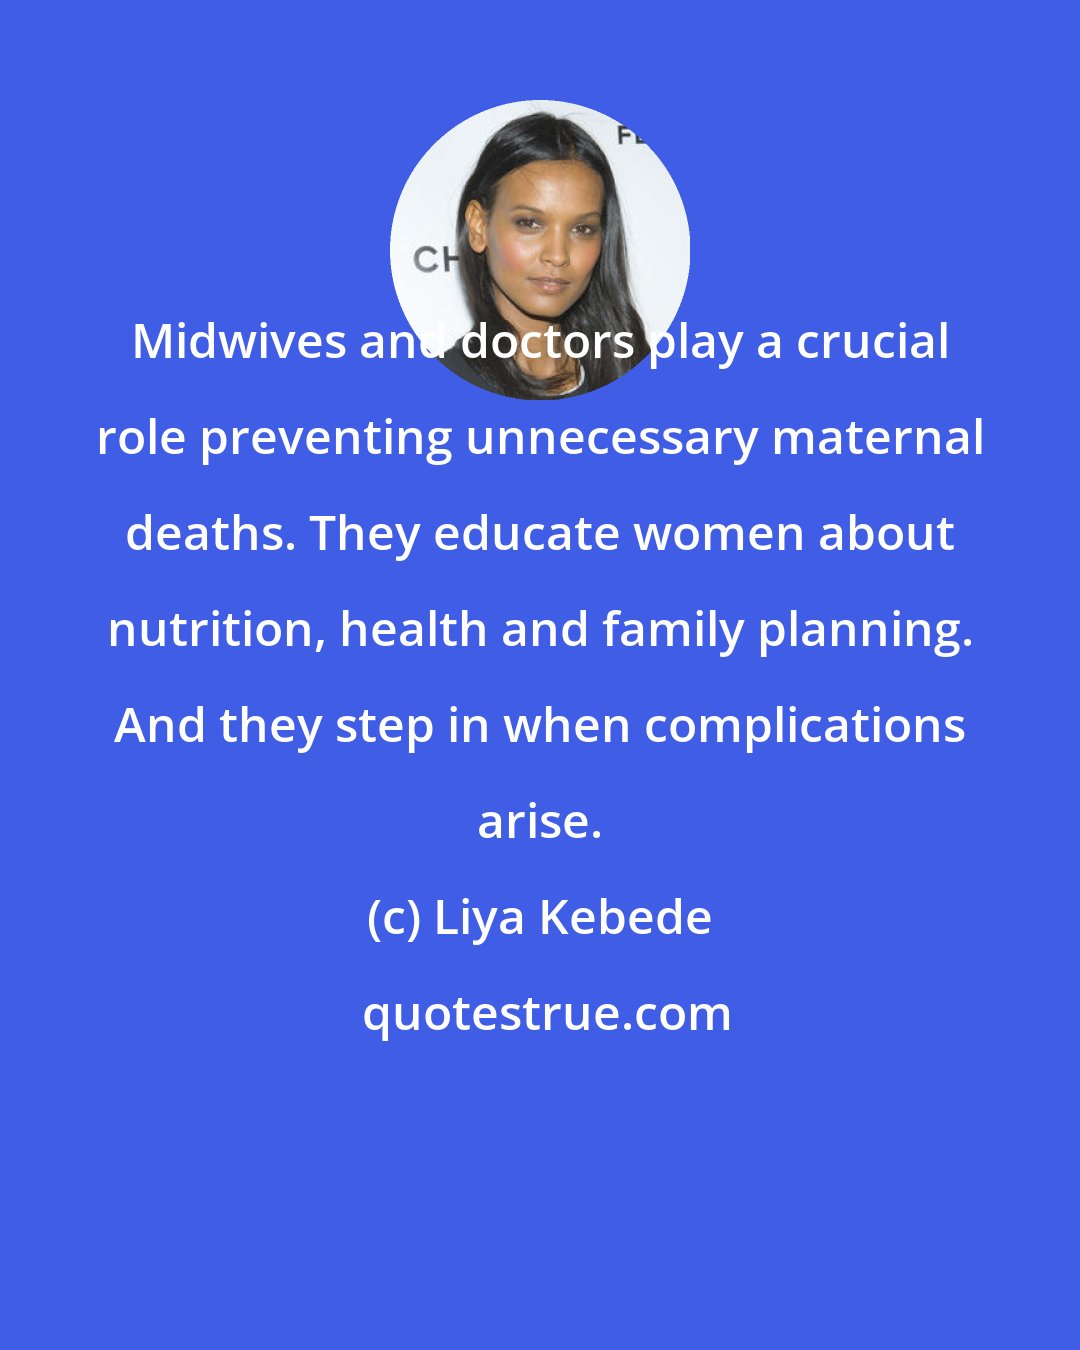 Liya Kebede: Midwives and doctors play a crucial role preventing unnecessary maternal deaths. They educate women about nutrition, health and family planning. And they step in when complications arise.